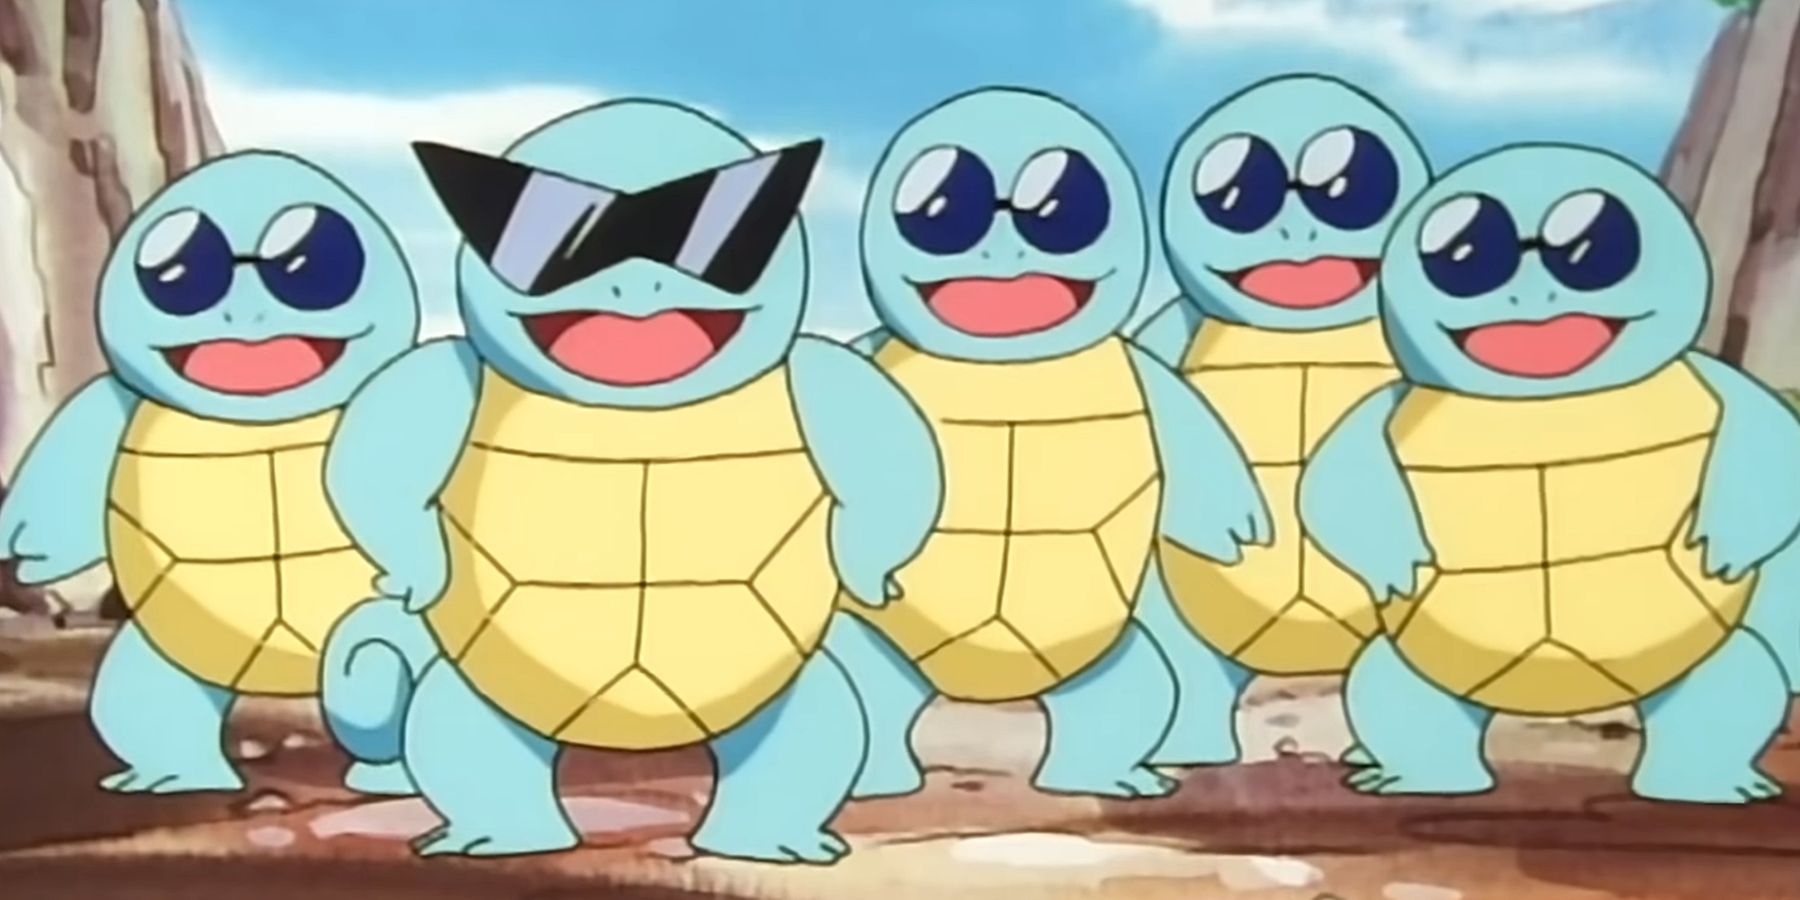 Artist Reimagines Squirtle As a Ground/Poison-Type Pokemon